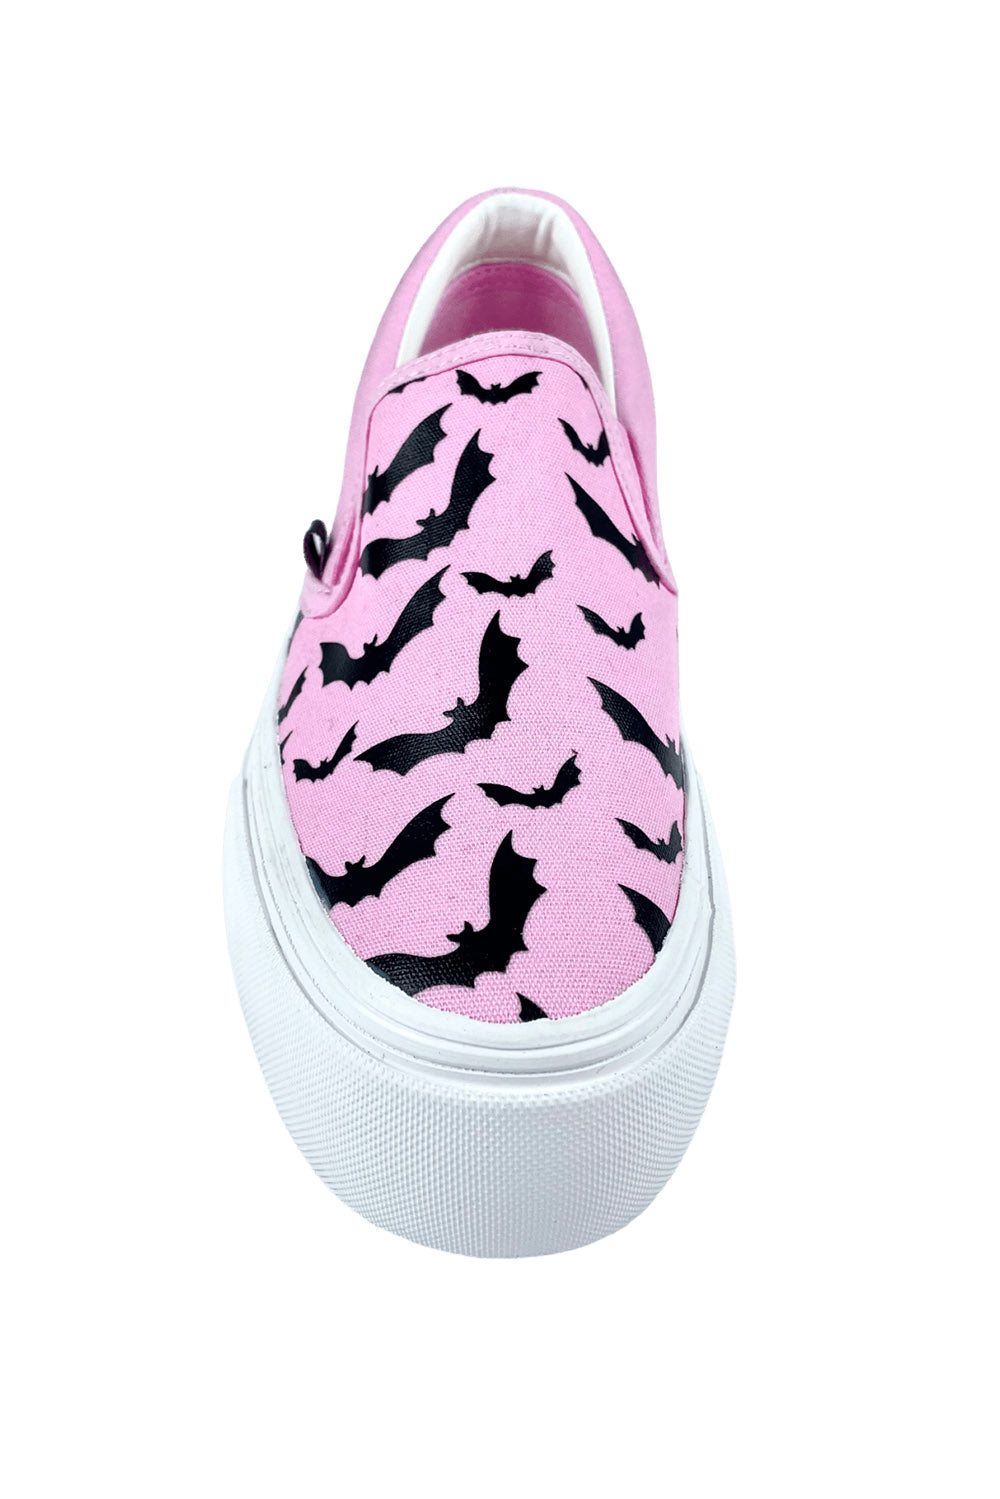 womens pastel goth shoes